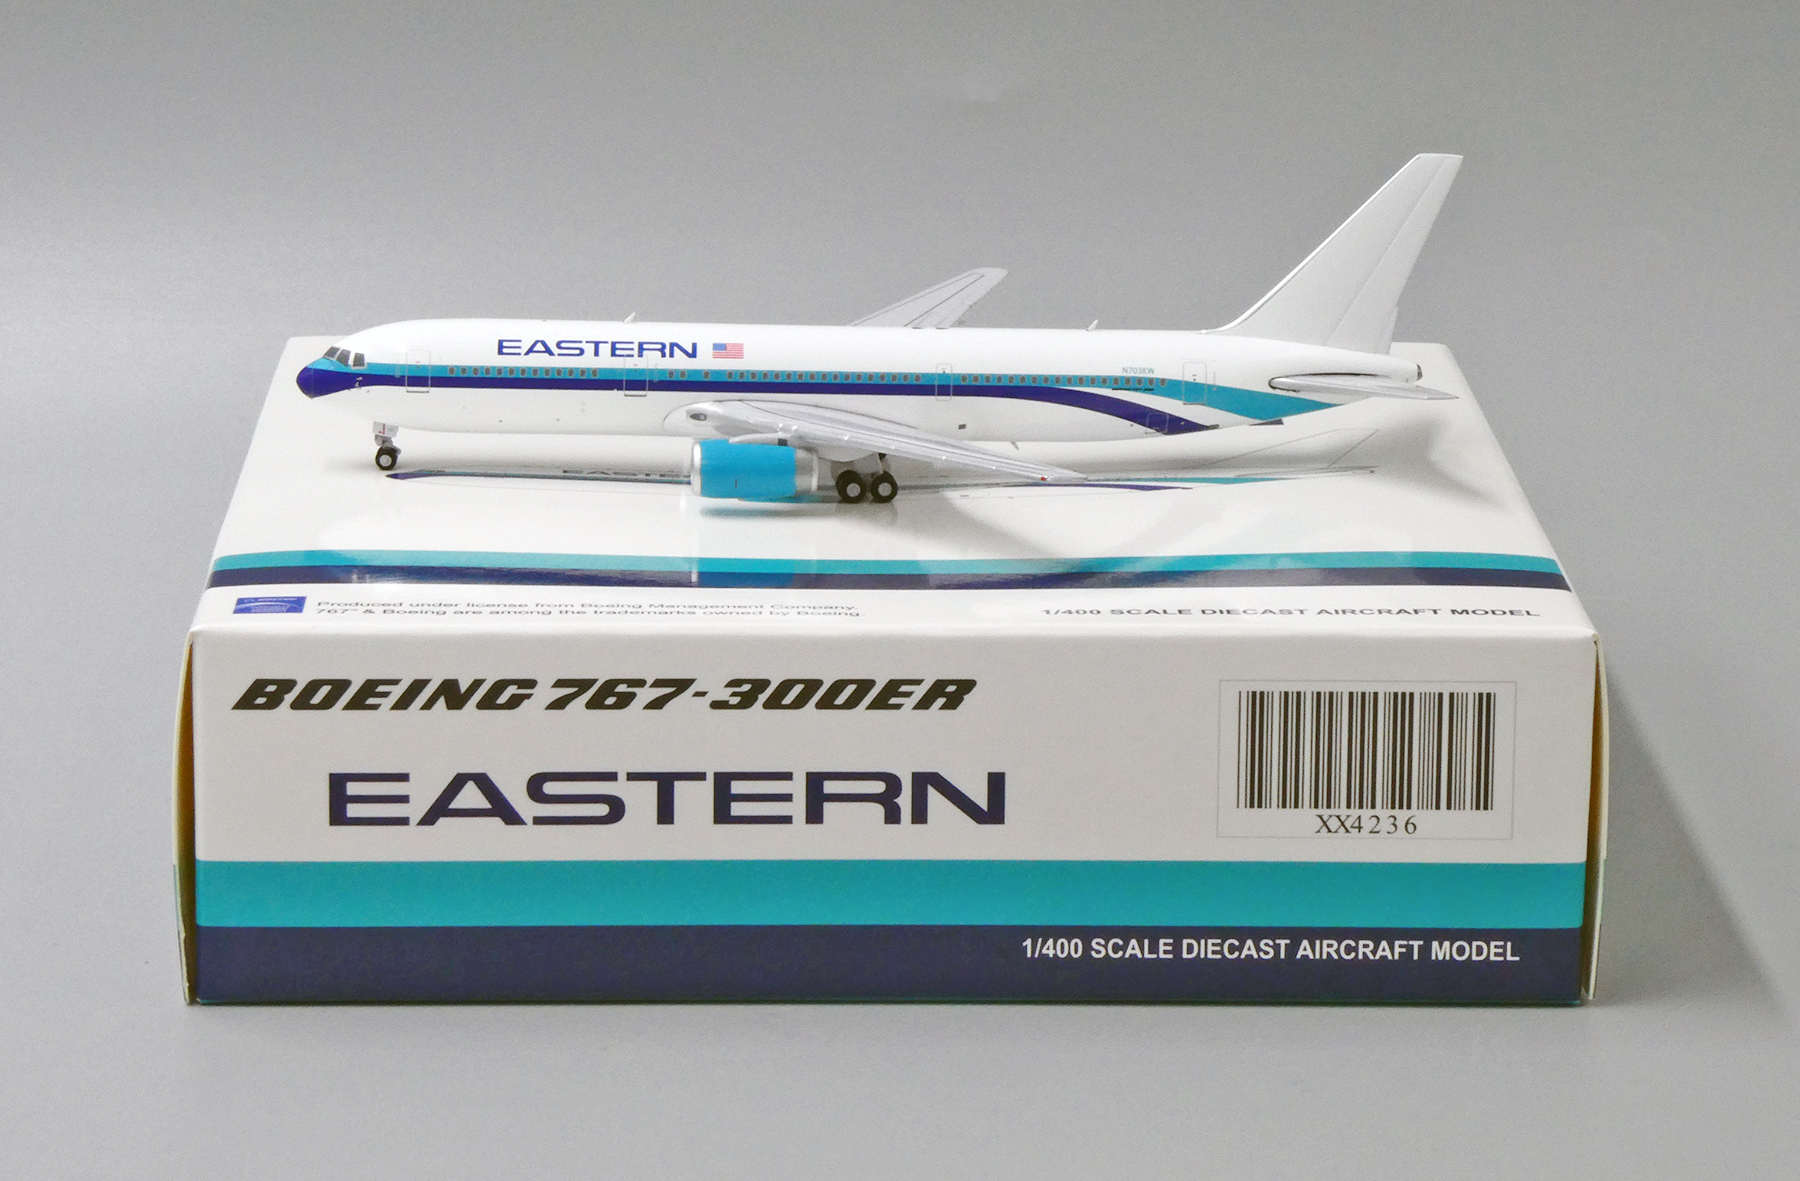 Details about   JC Wings EASTERN for BOEING 767-300ER N703KW 1/400 diecast plane model aircraft 